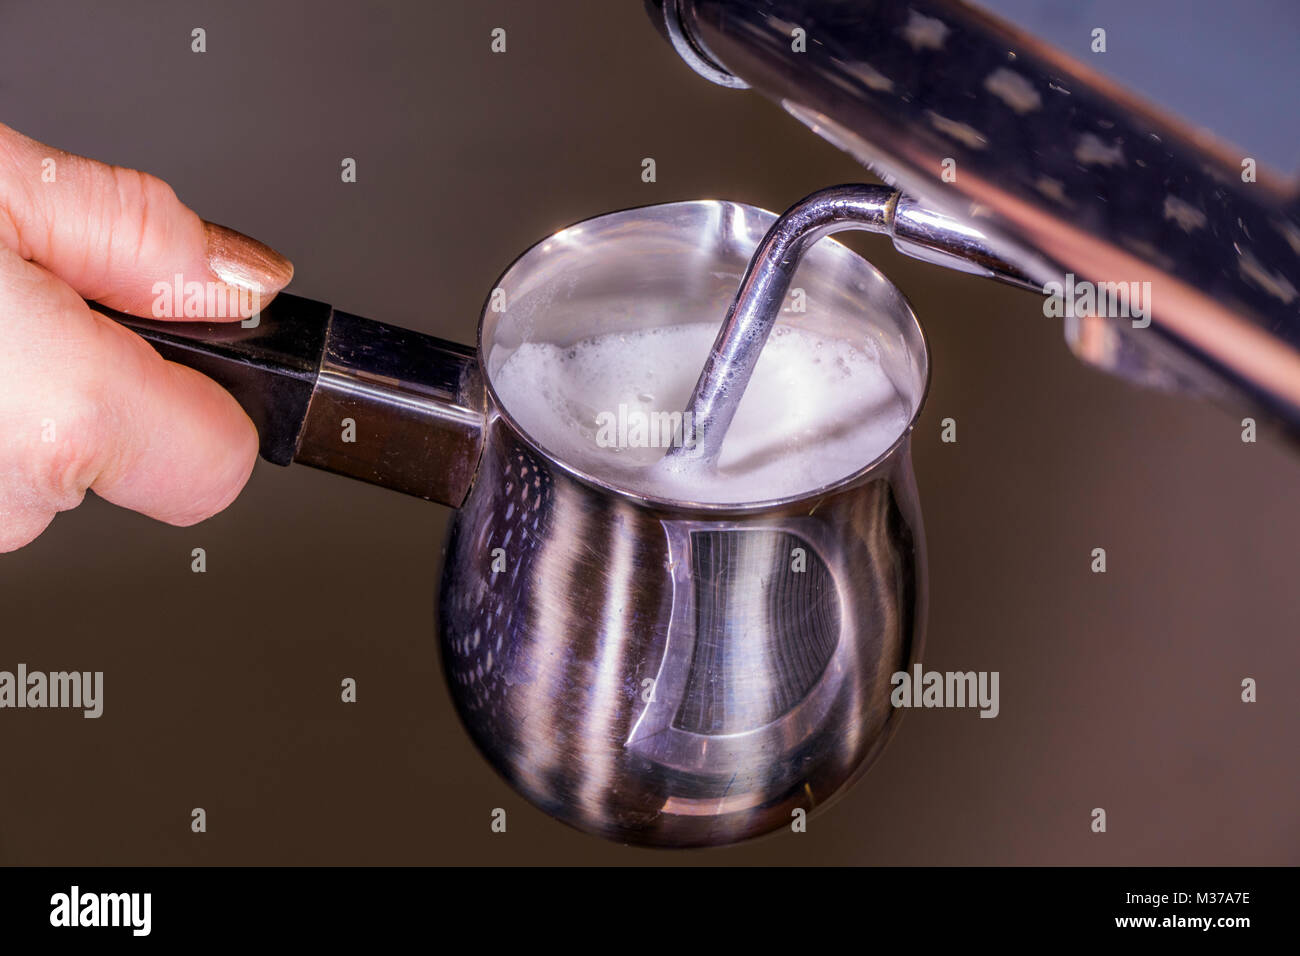 https://c8.alamy.com/comp/M37A7E/womans-hand-holding-a-stainless-steel-milk-frothing-jug-under-the-M37A7E.jpg